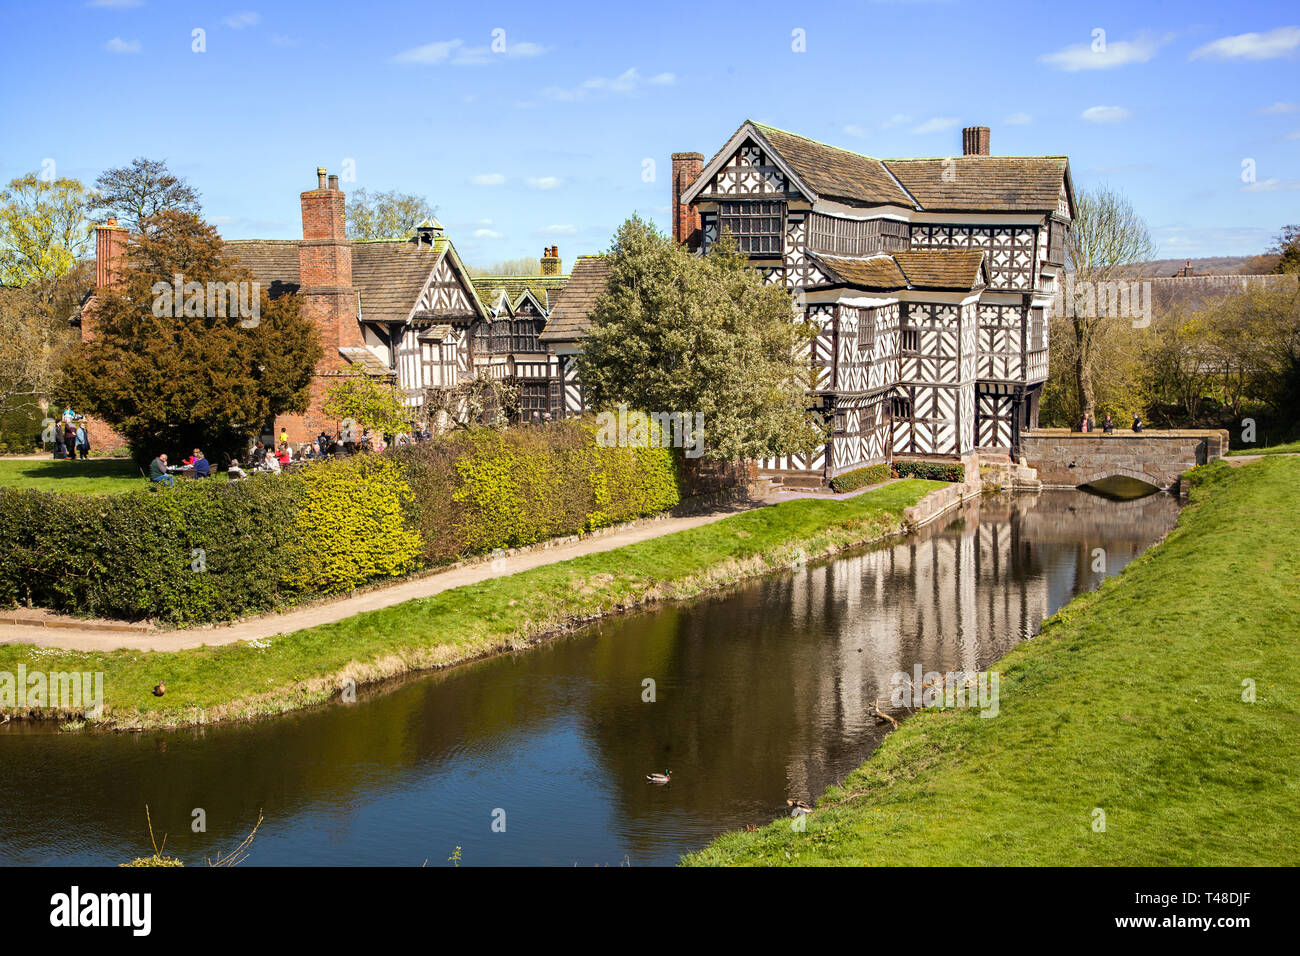 Little Moreton Hall, moated black and white half timbered Tudor manor house near Congleton in Cheshire, owned by the national trust Stock Photo